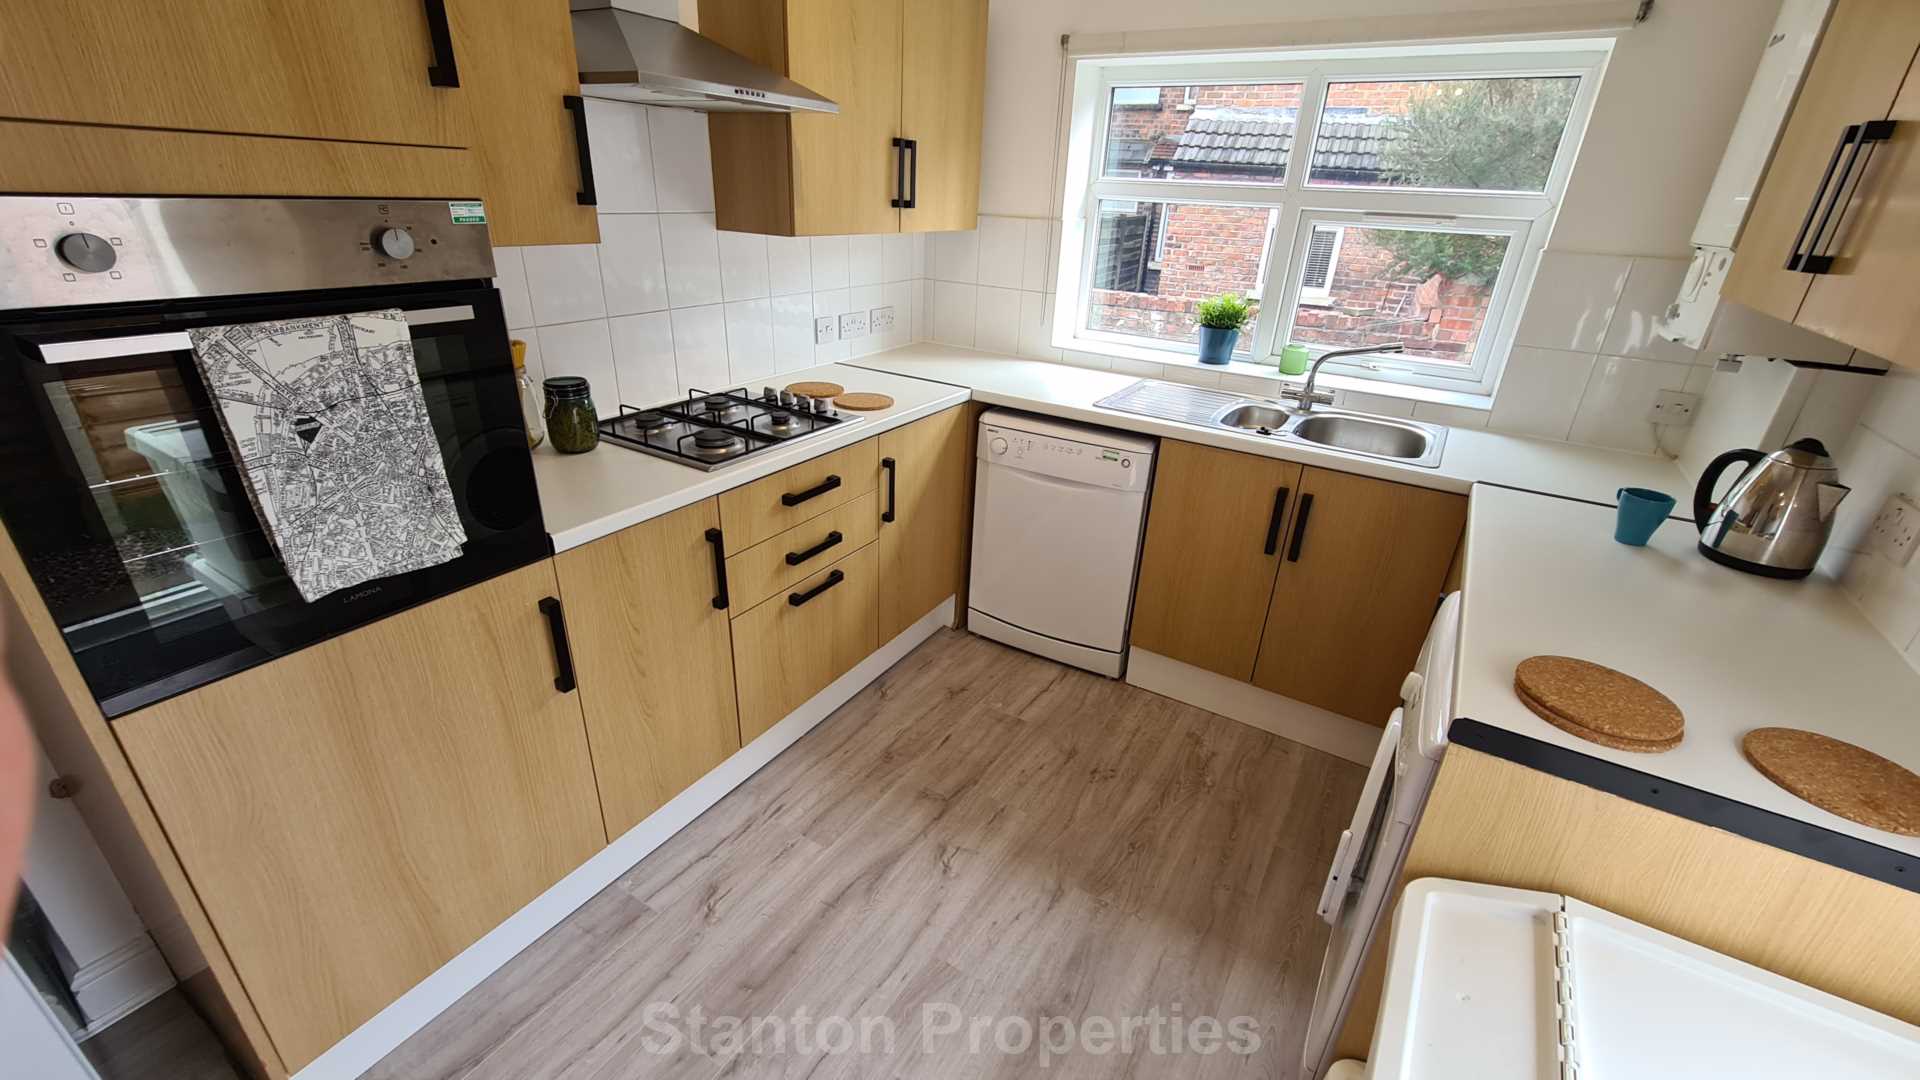 £120 pppw, See Video Tour, Mabfield Road, Manchester, Image 1